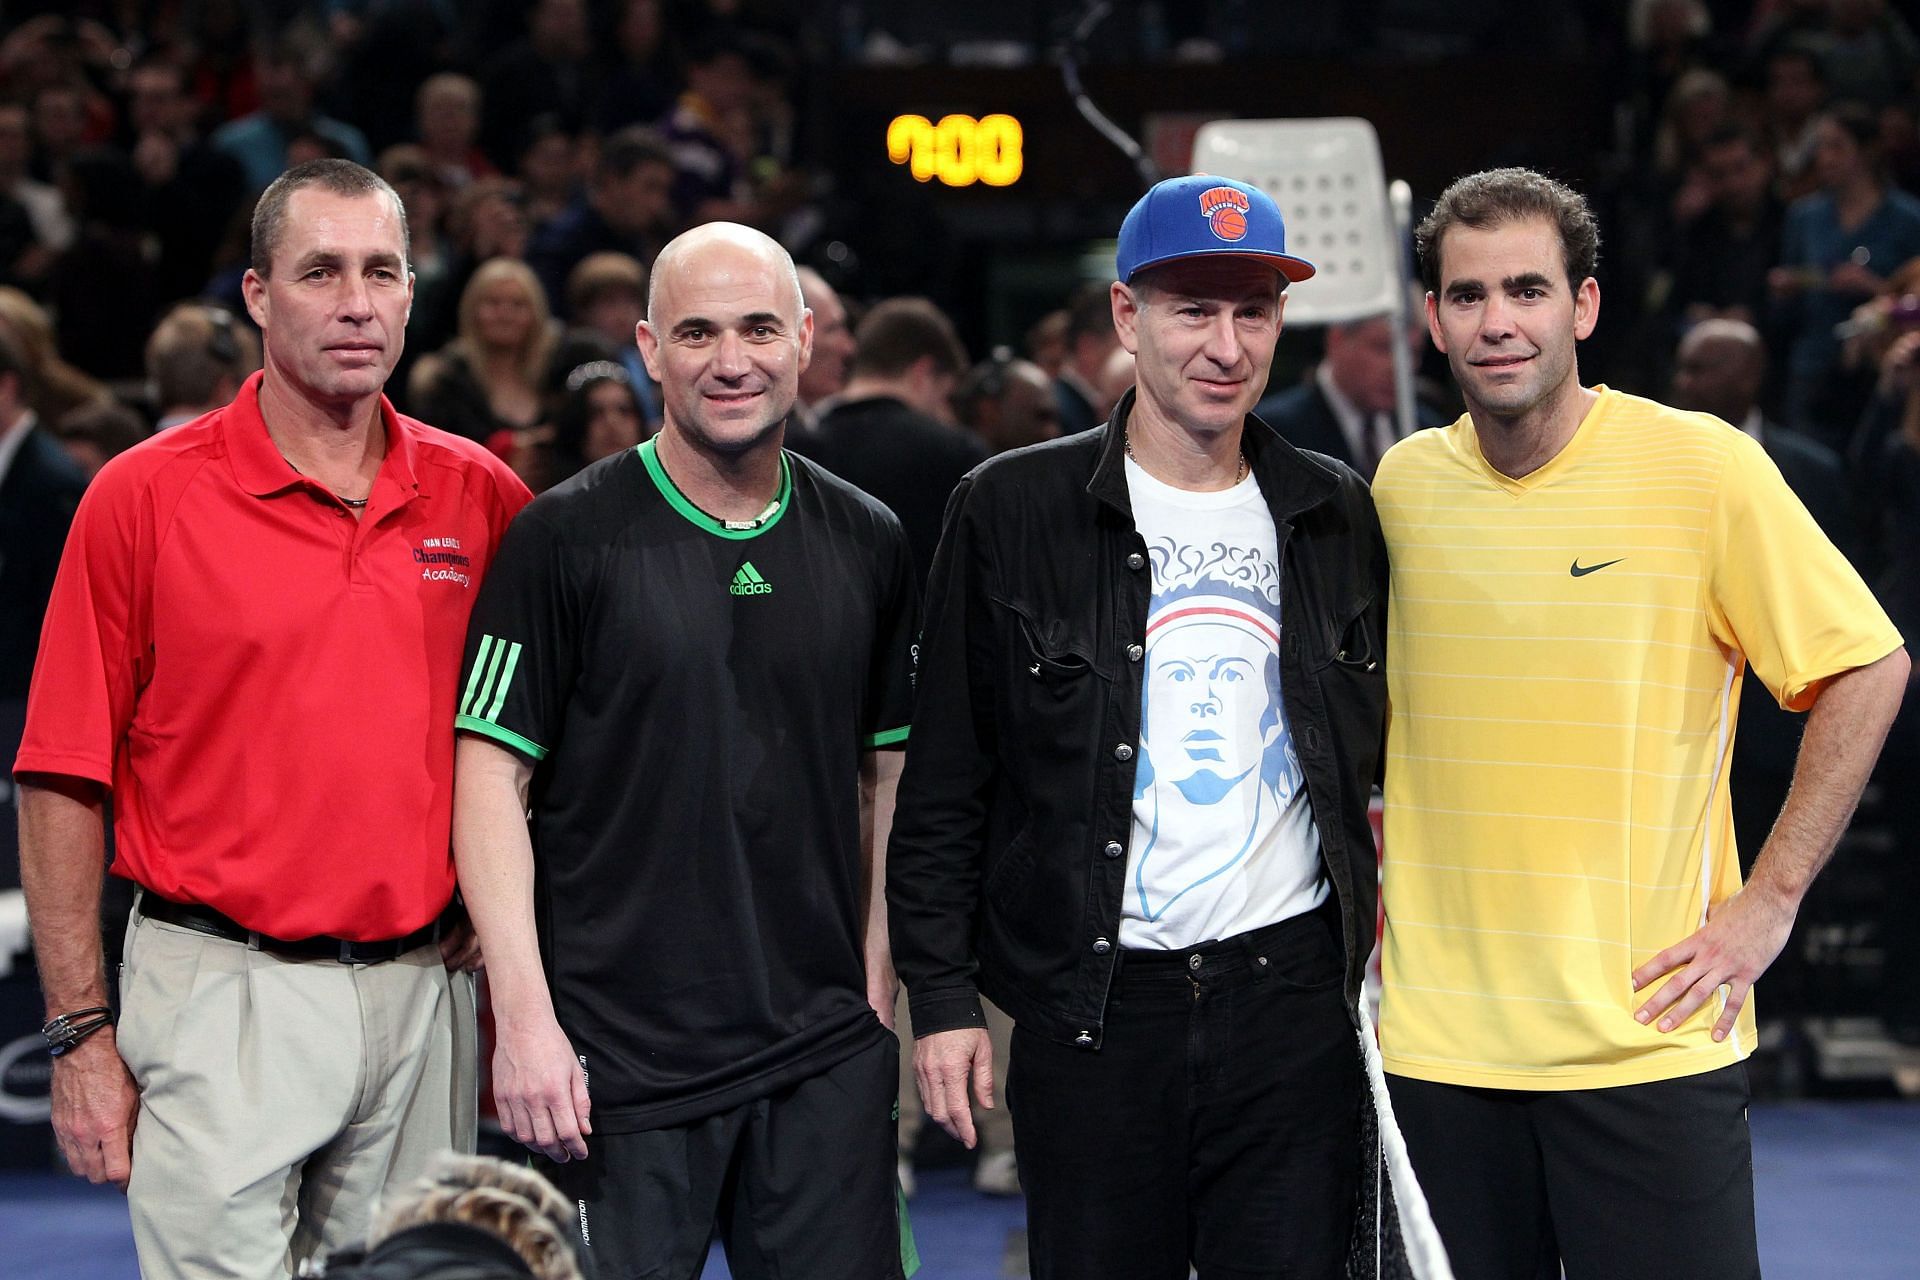 Andre Agassi and Pete Sampras with Ivan Lendl and John McEnroe